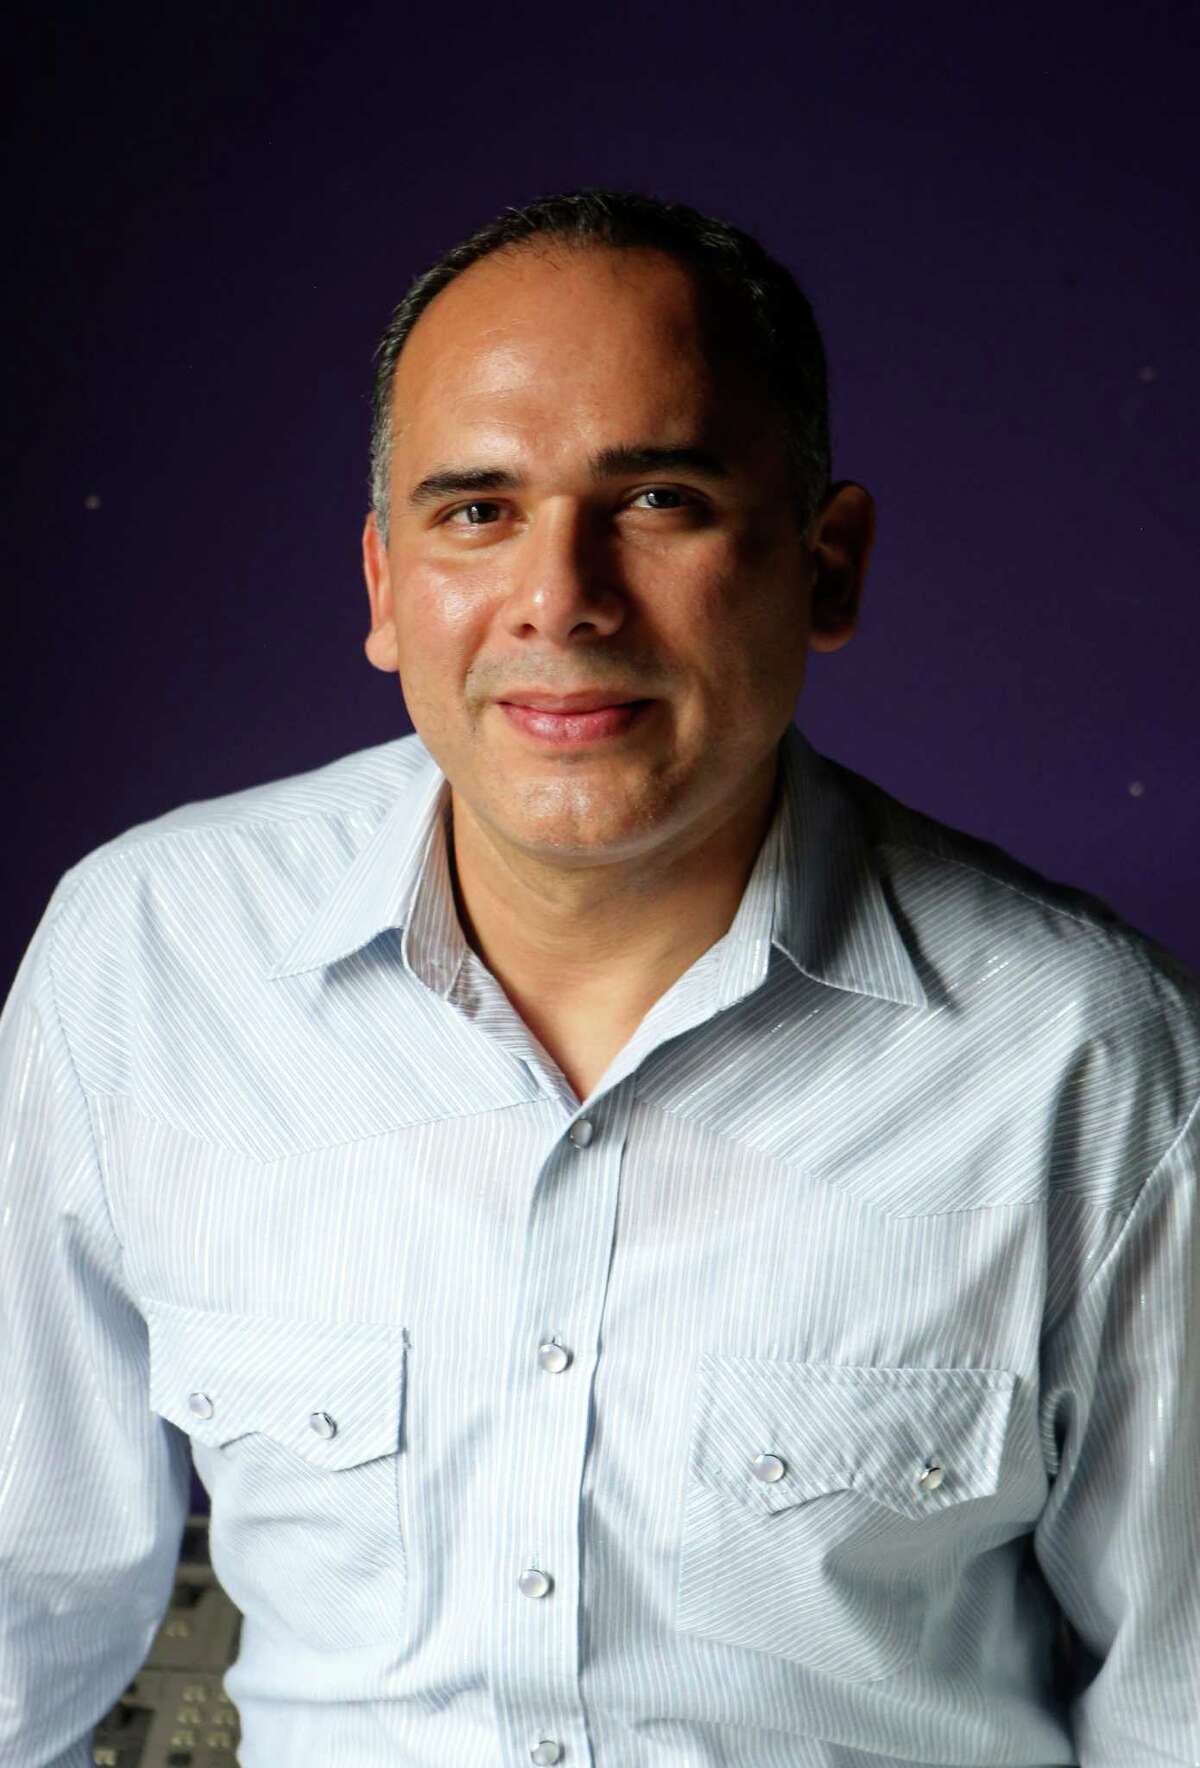 San Antonio playwright Jesus Alonzo will have his play "Jotos del Barrio" staged at the Esperanza Center in June. The play, written in 1995, explores the identity and experience the LGBT community within the Latino culture.